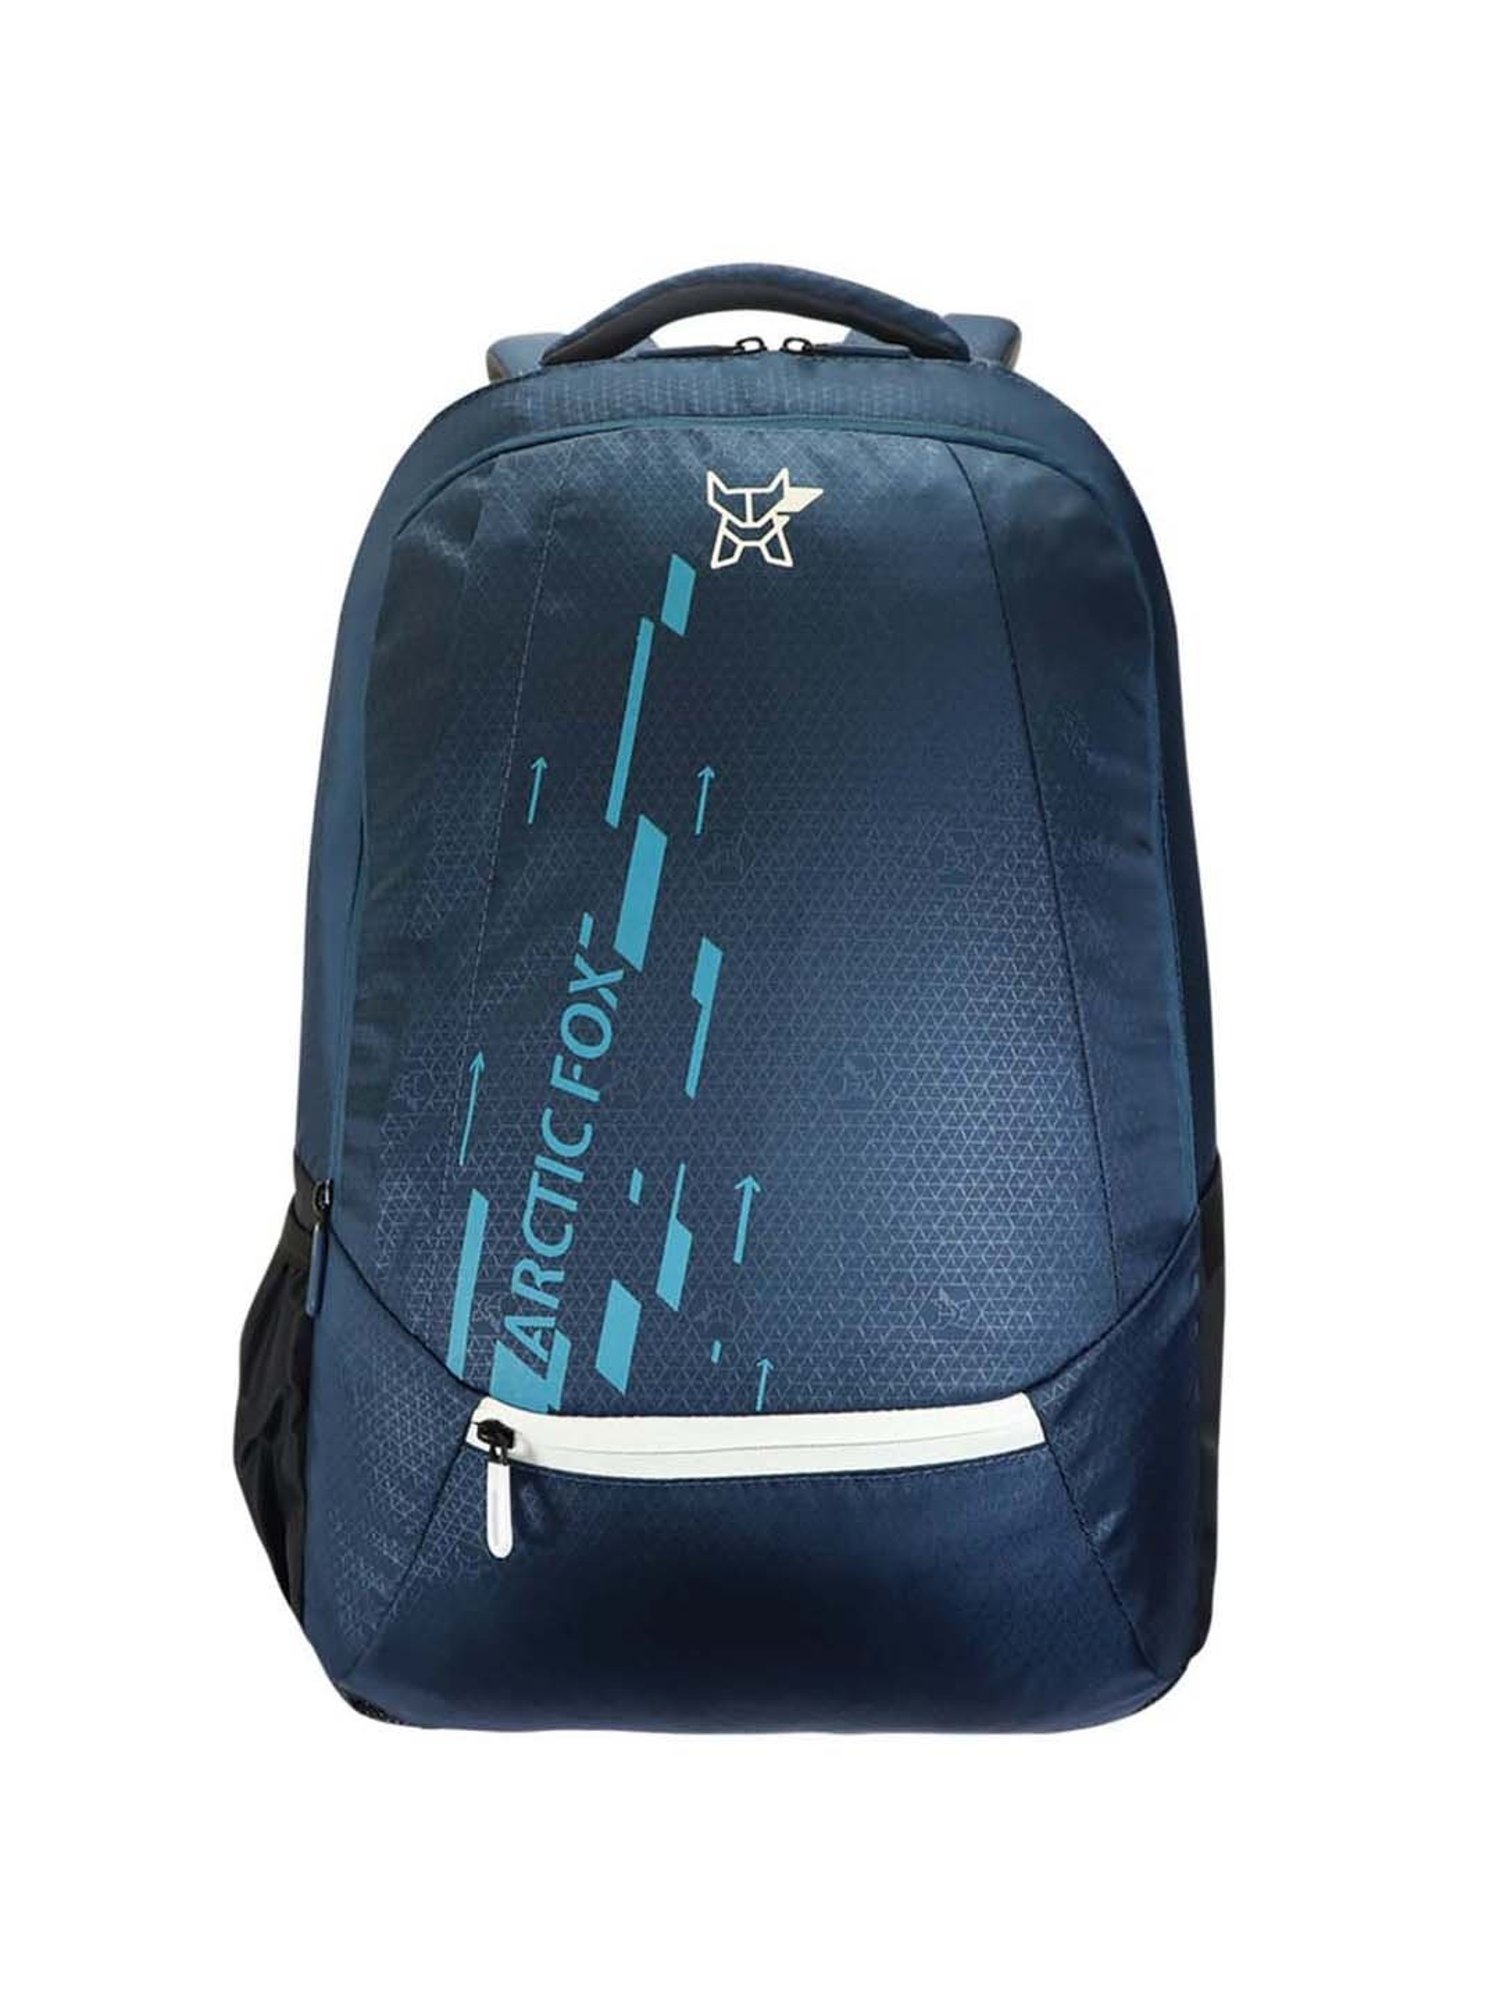 Buy Arctic Fox 45.5 Ltrs Navy Solid Backpack Online At Best Price @ Tata  CLiQ